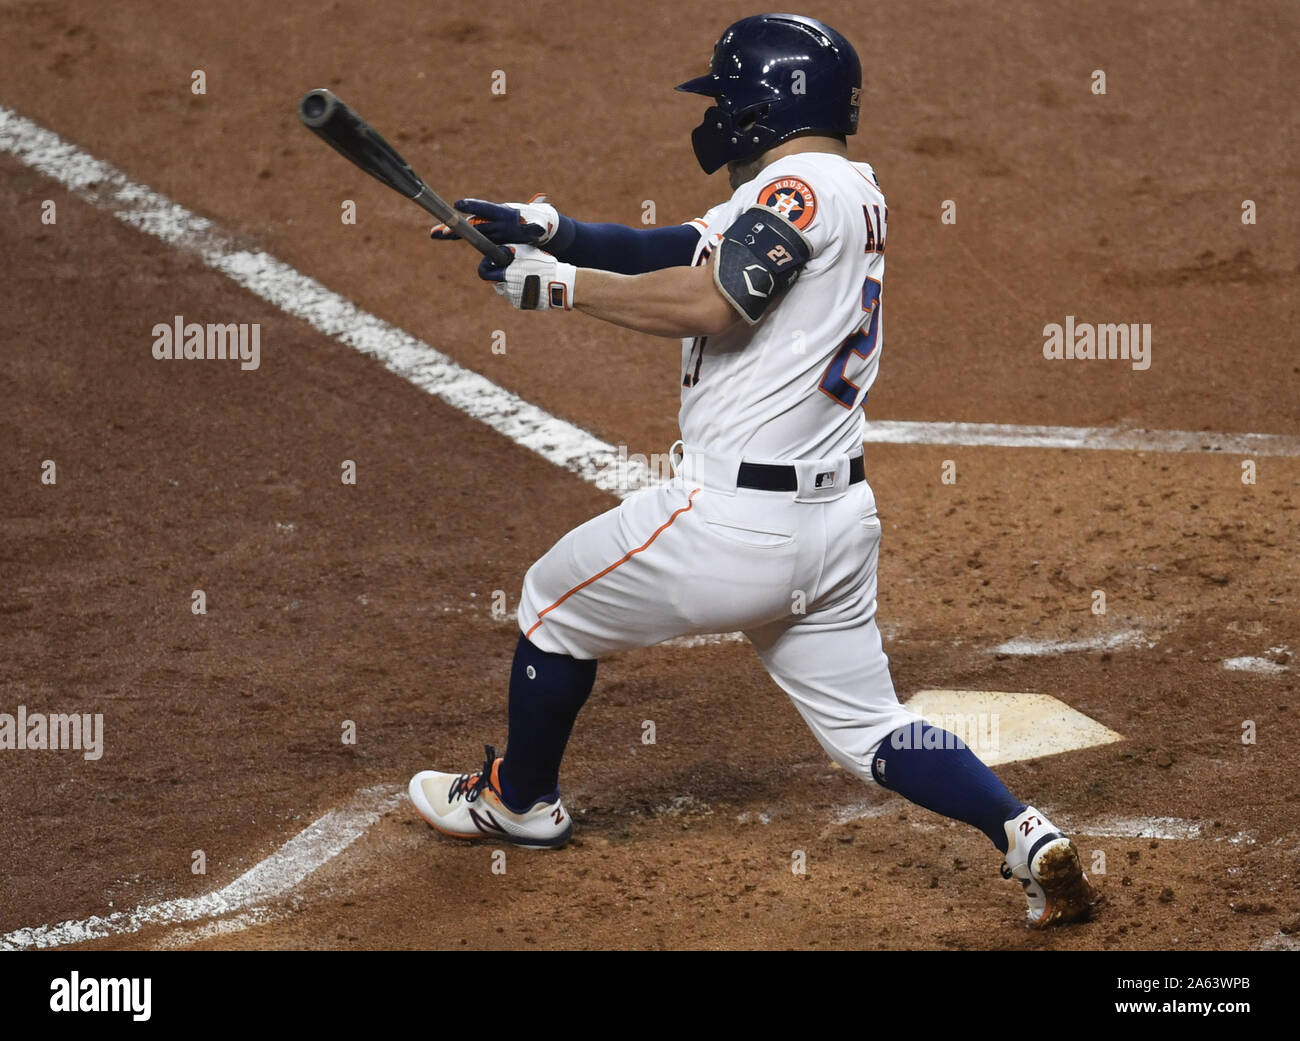 Houston, United States. 23rd Oct, 2019. Houston Astros Jose Altuve hits a double against the Washington Nationals in the first inning of Game 2 of the World Series at Minute Maid Park in Houston, Texas on Wednesday, October 23, 2019. The Nationals lead the best-of-seven series 1-0. Photo by Trask Smith/UPI Credit: UPI/Alamy Live News Stock Photo